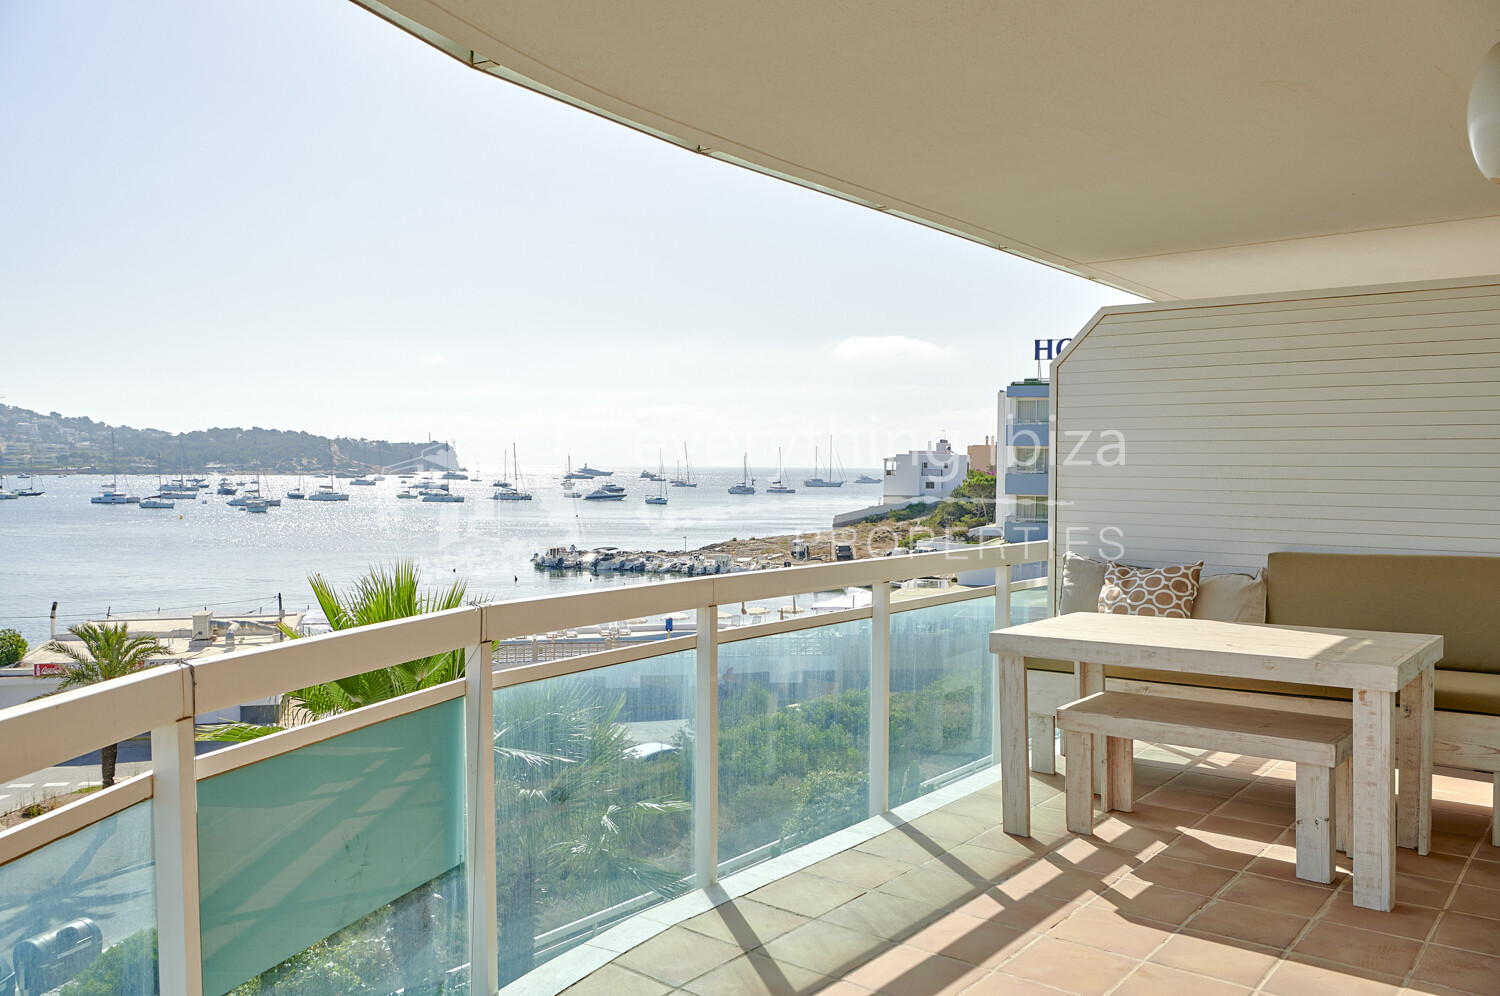 Striking Contemporary Apartment with Super Views of Talamanca Bay, ref. 1551, for sale in Ibiza by everything ibiza Properties